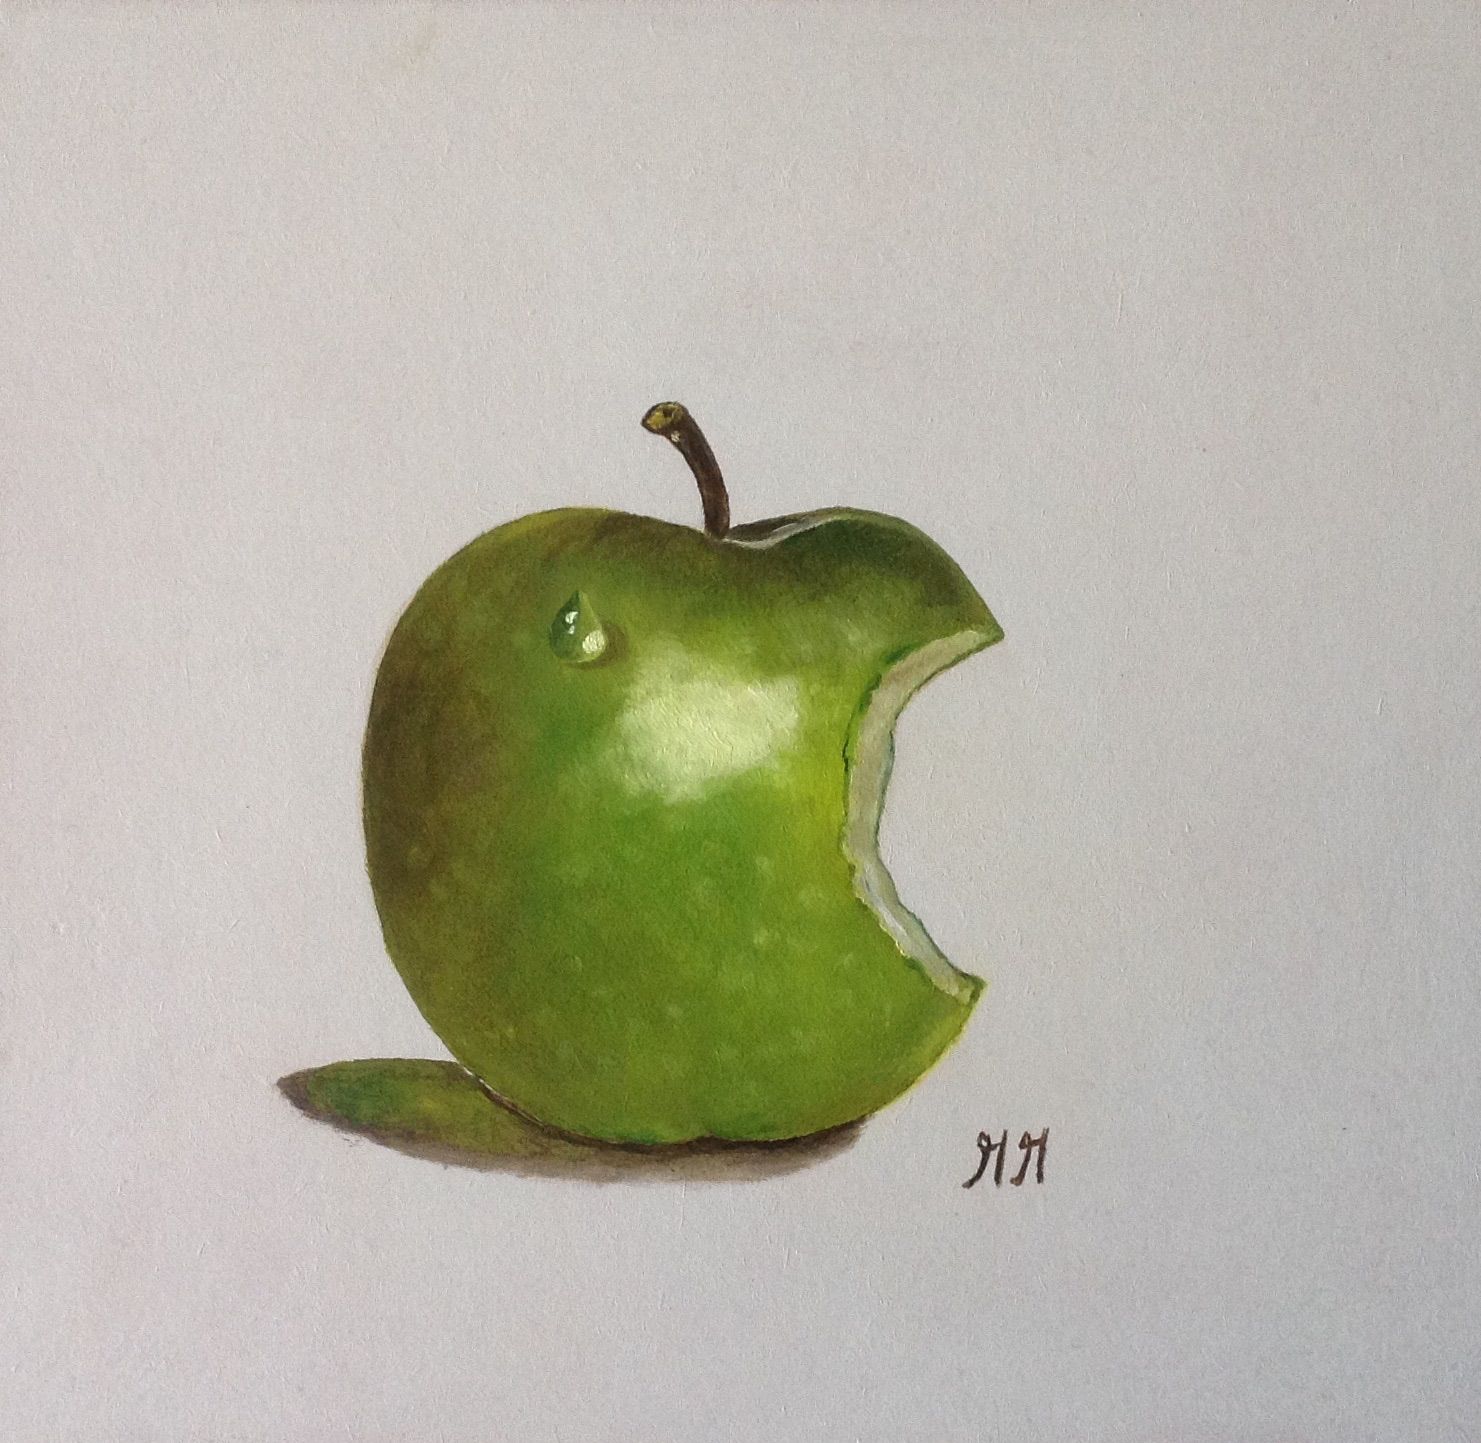 My crying Apple | Ma galerie Still Life fruits et légumes ...